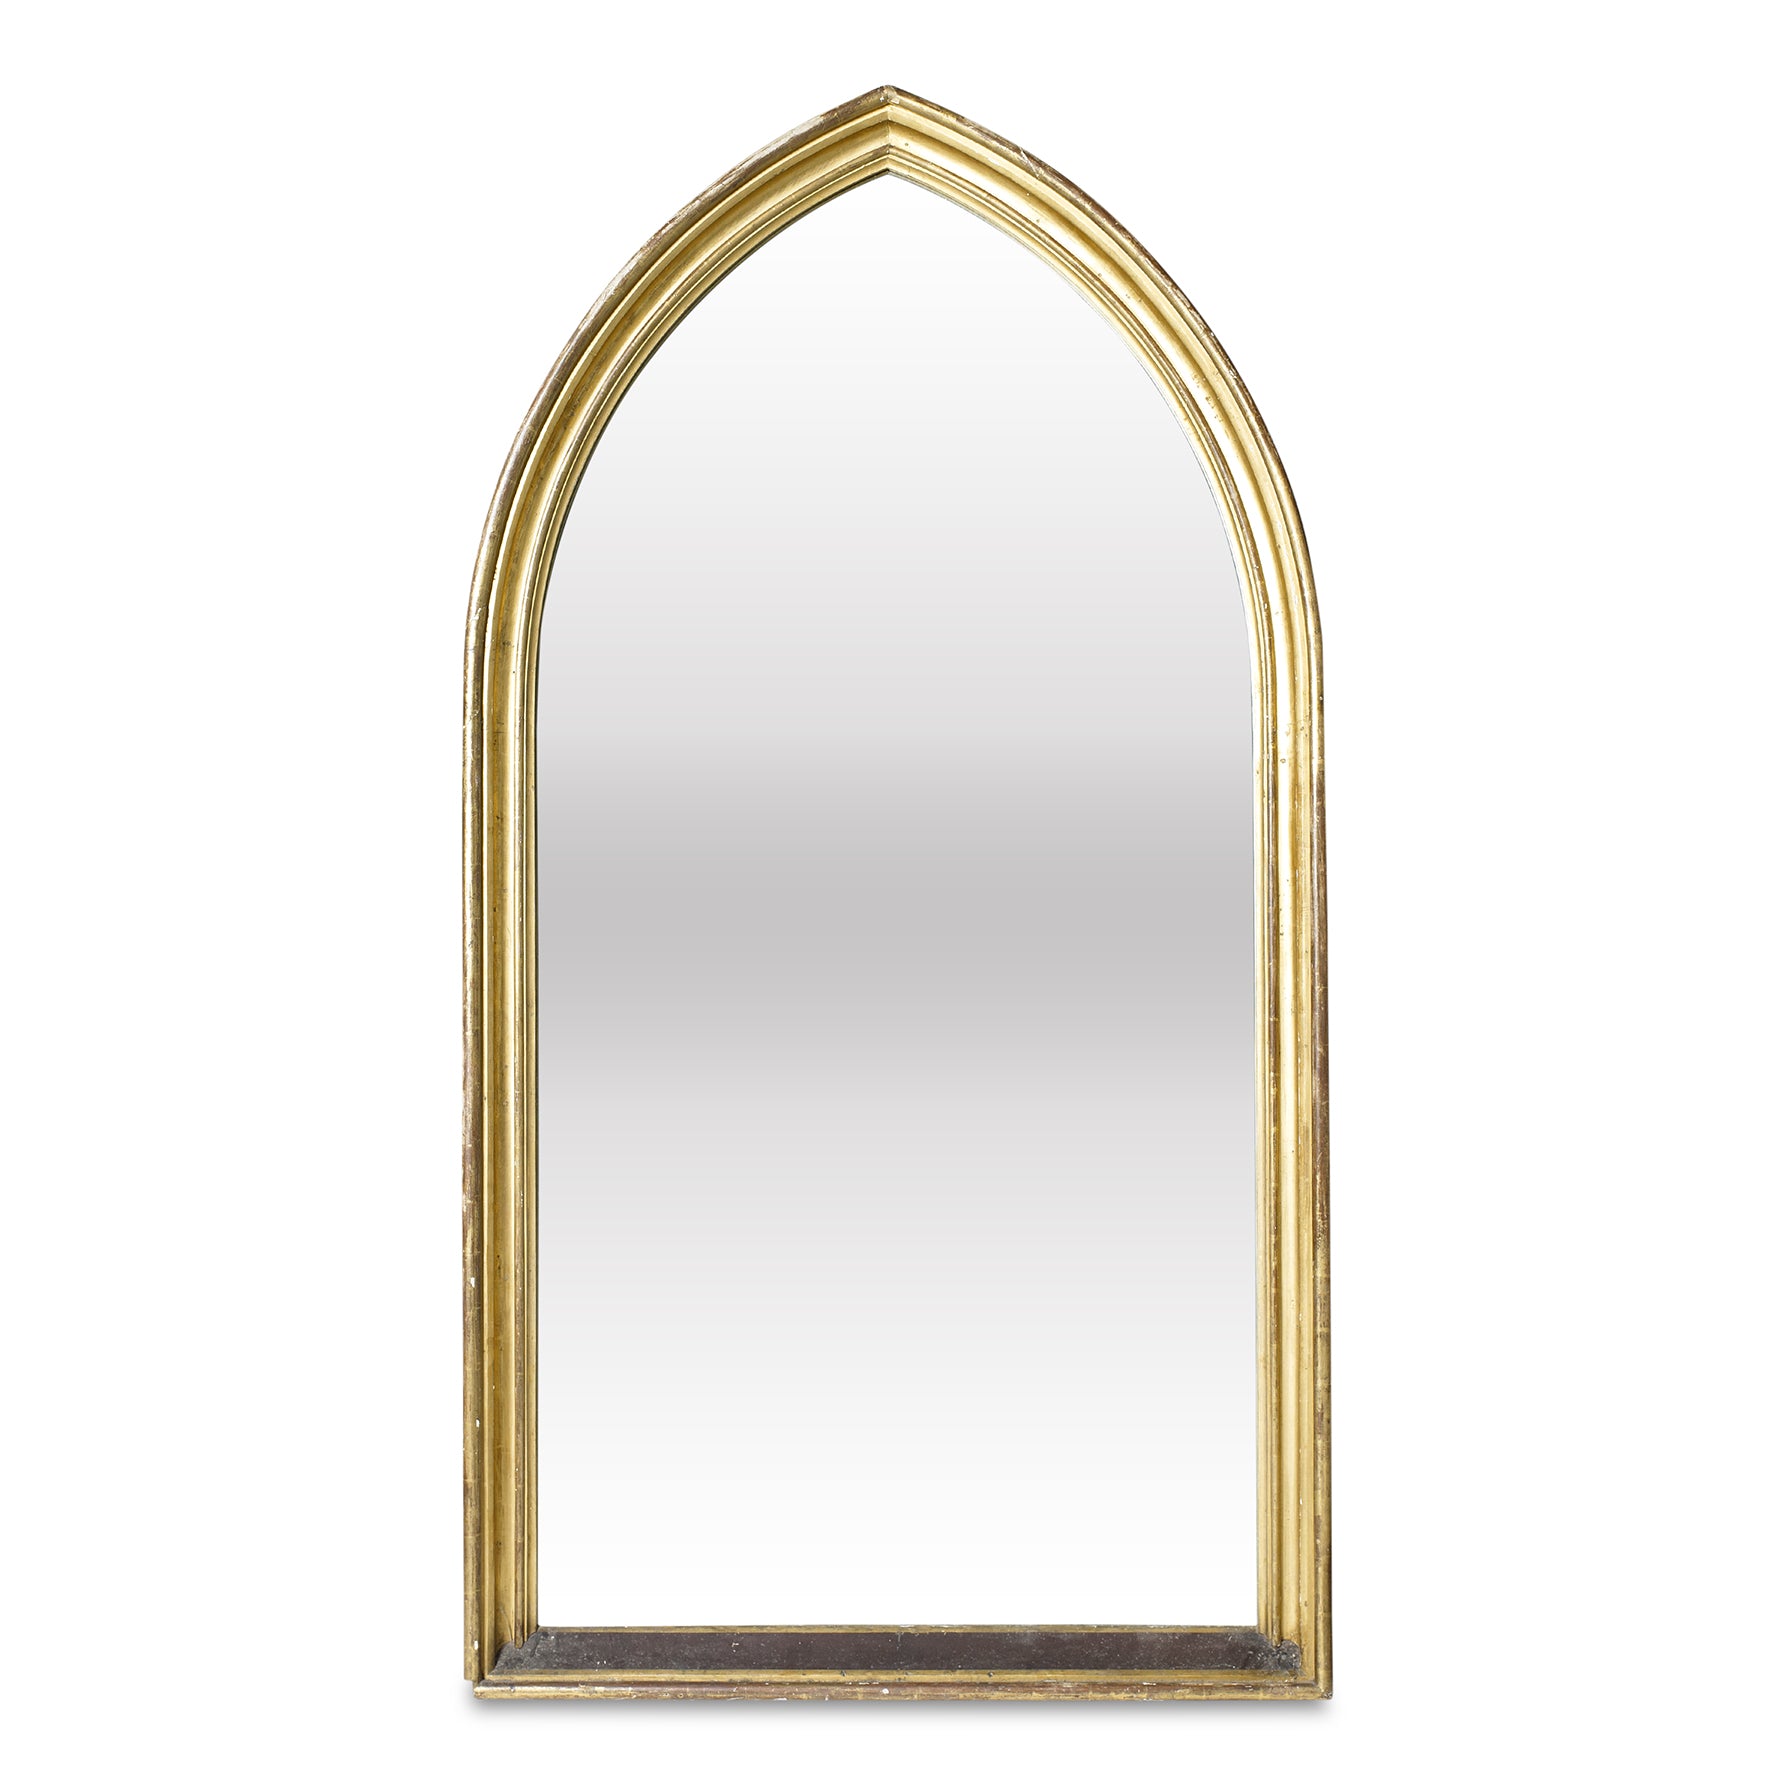 SOLD An impressive gilt-wood arched wall mirror, English 19th Century